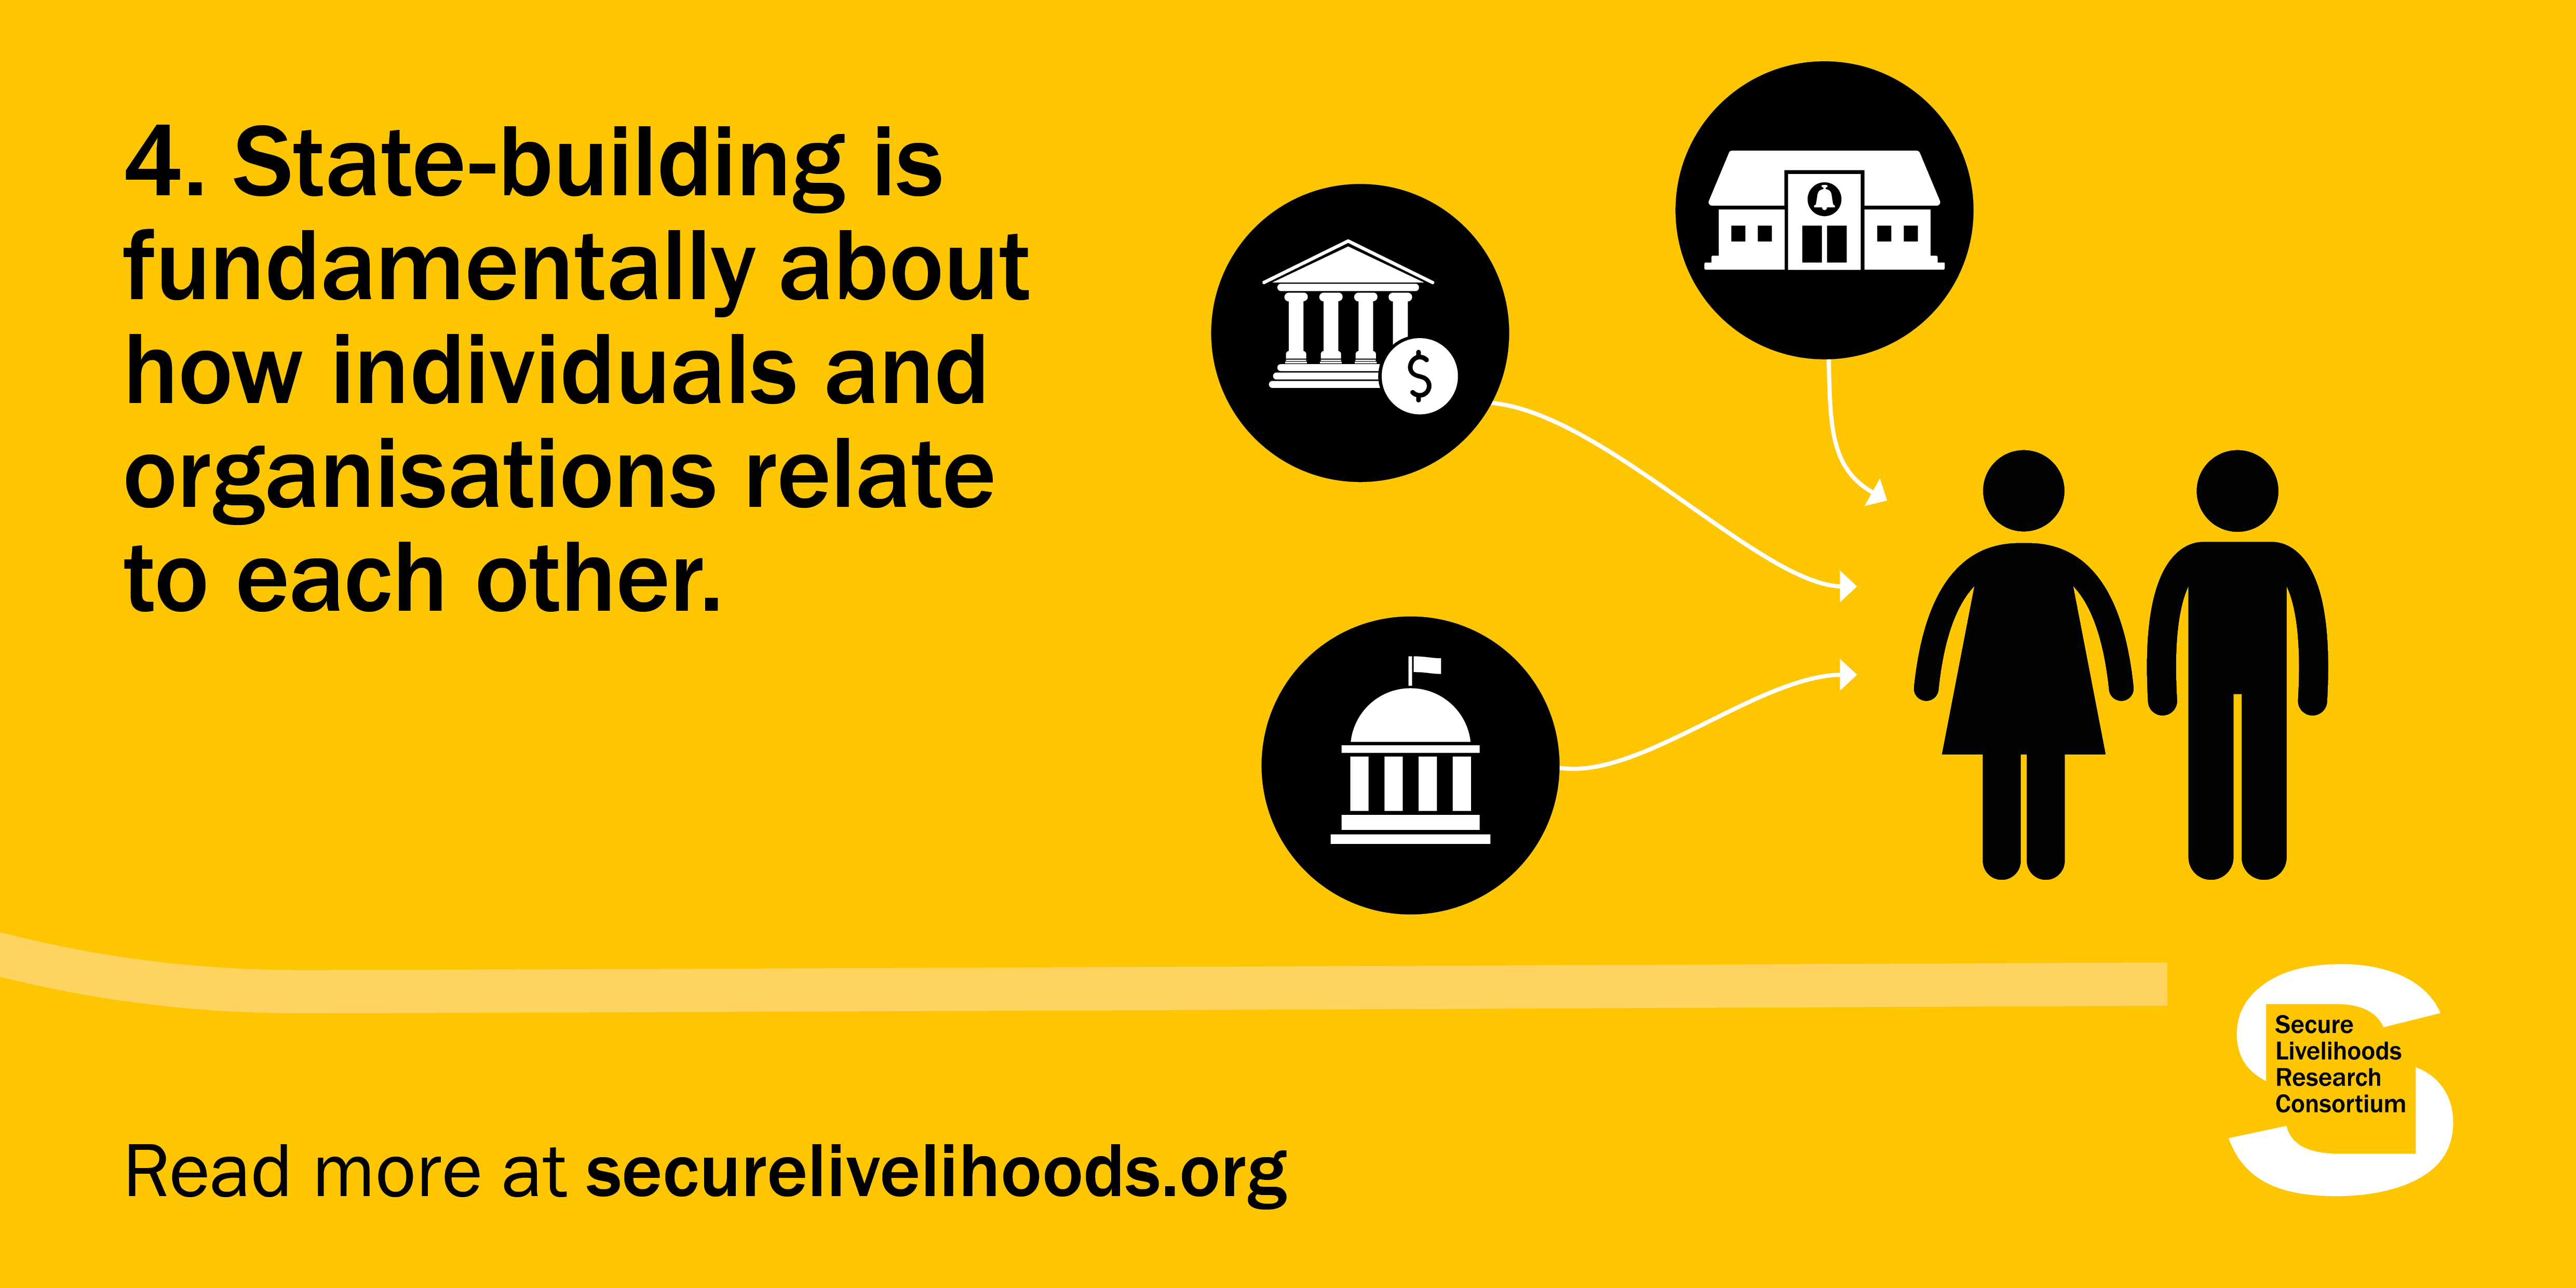 State-building is fundamentally about how individuals and organisations relate to each other